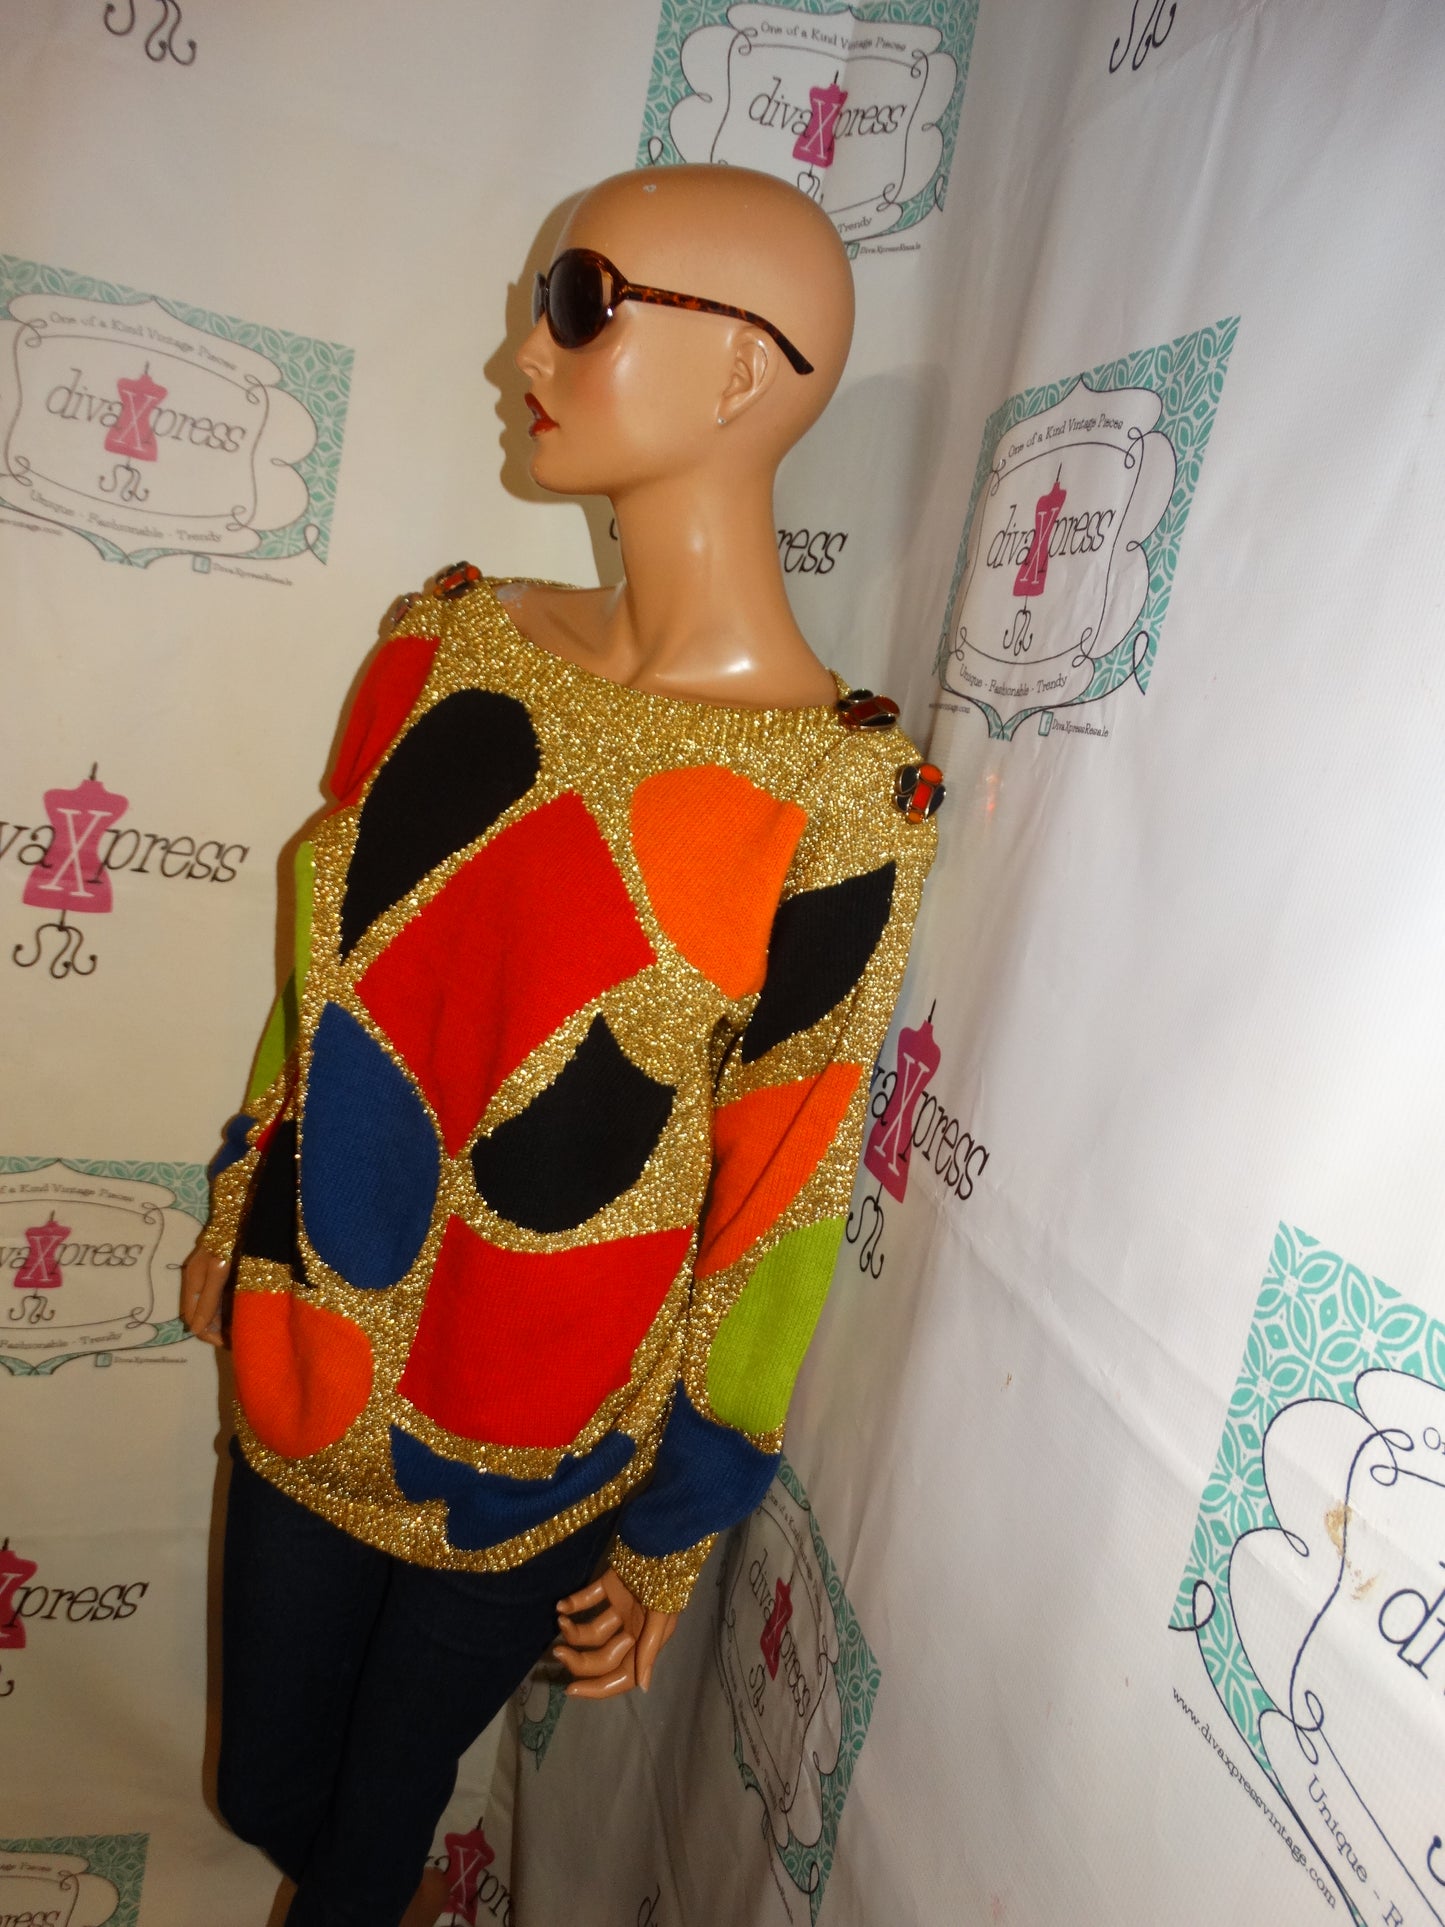 Vintage Spree International Gold Colorful Sweater Size 1x